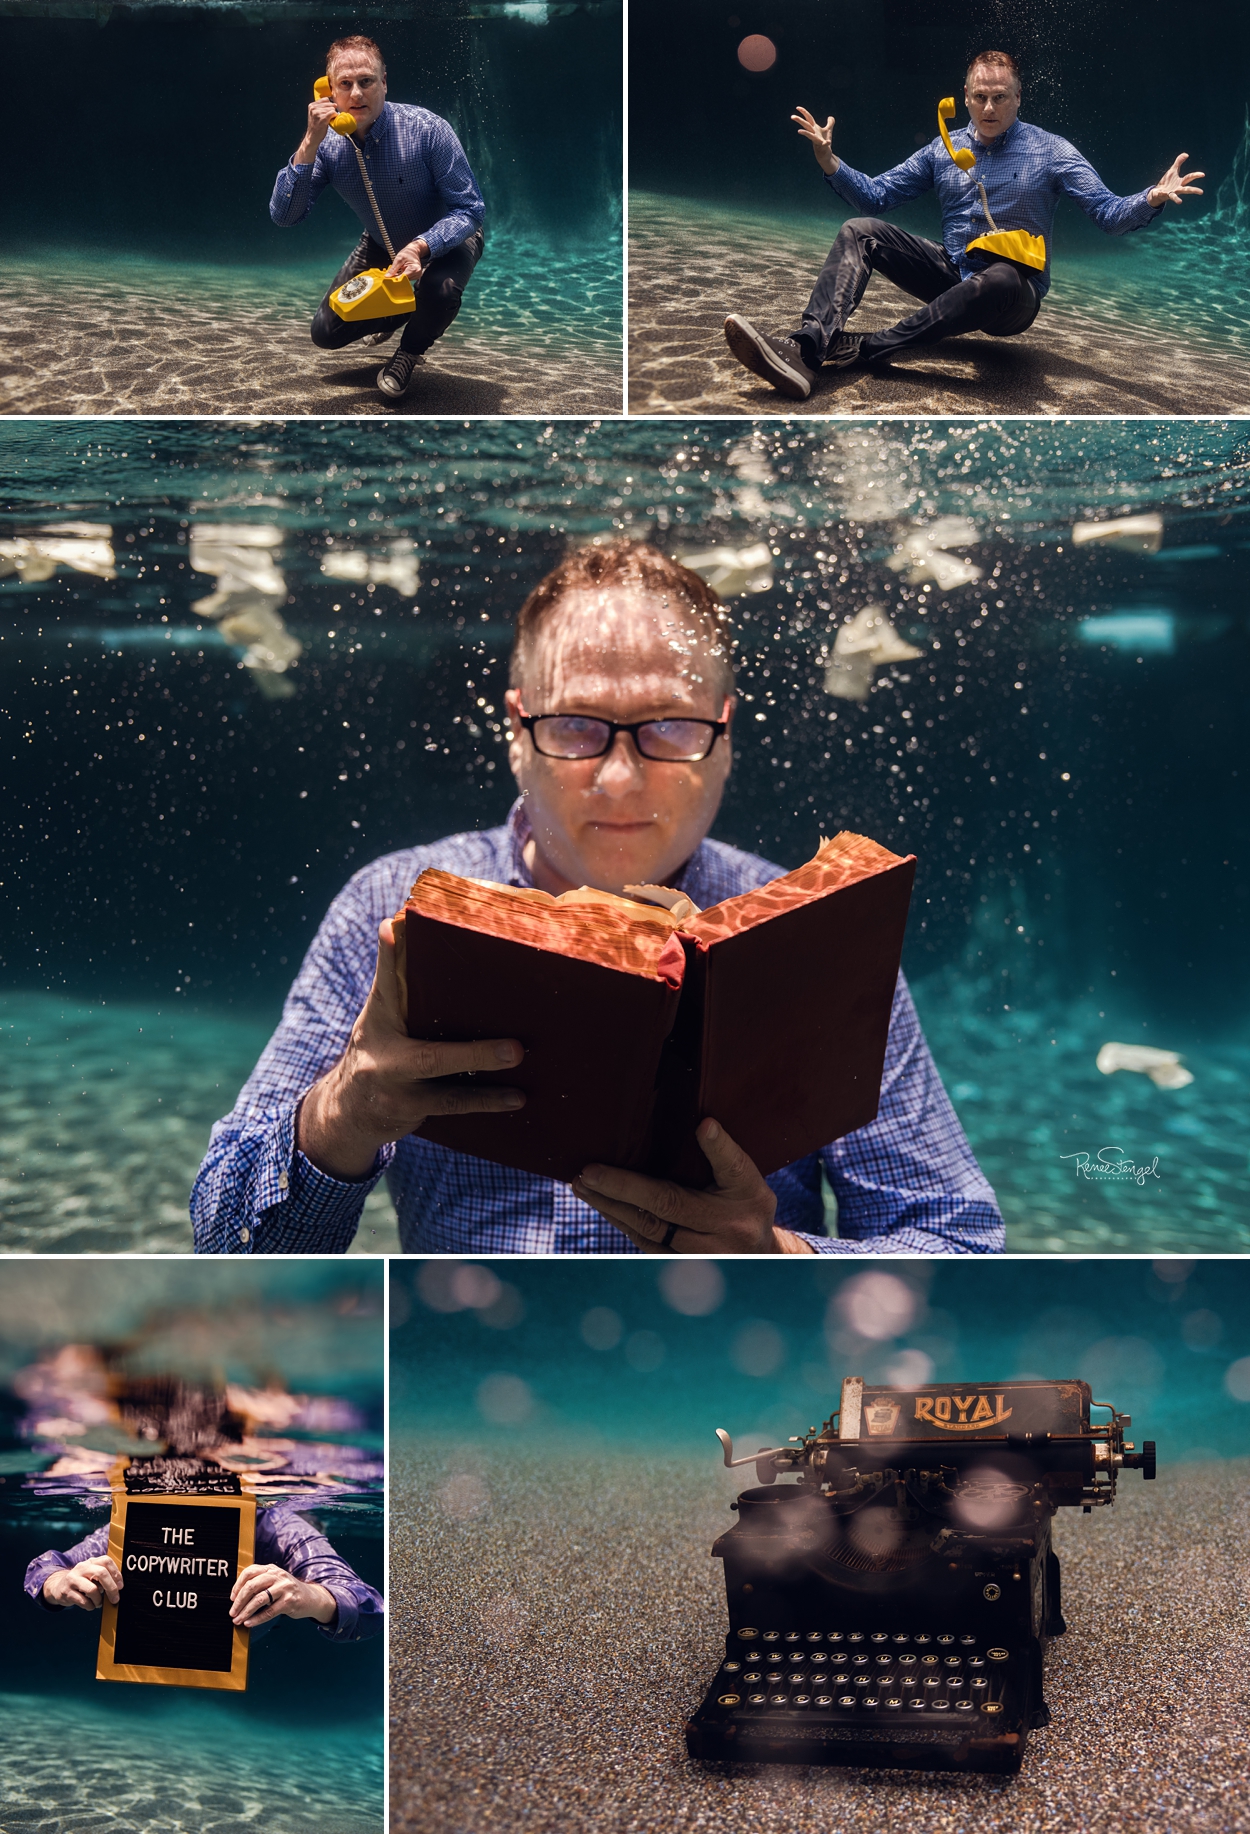 Rob Marsh, CoFounder of The Copywriter Club with Books and Vintage Yellow Phone Underwater